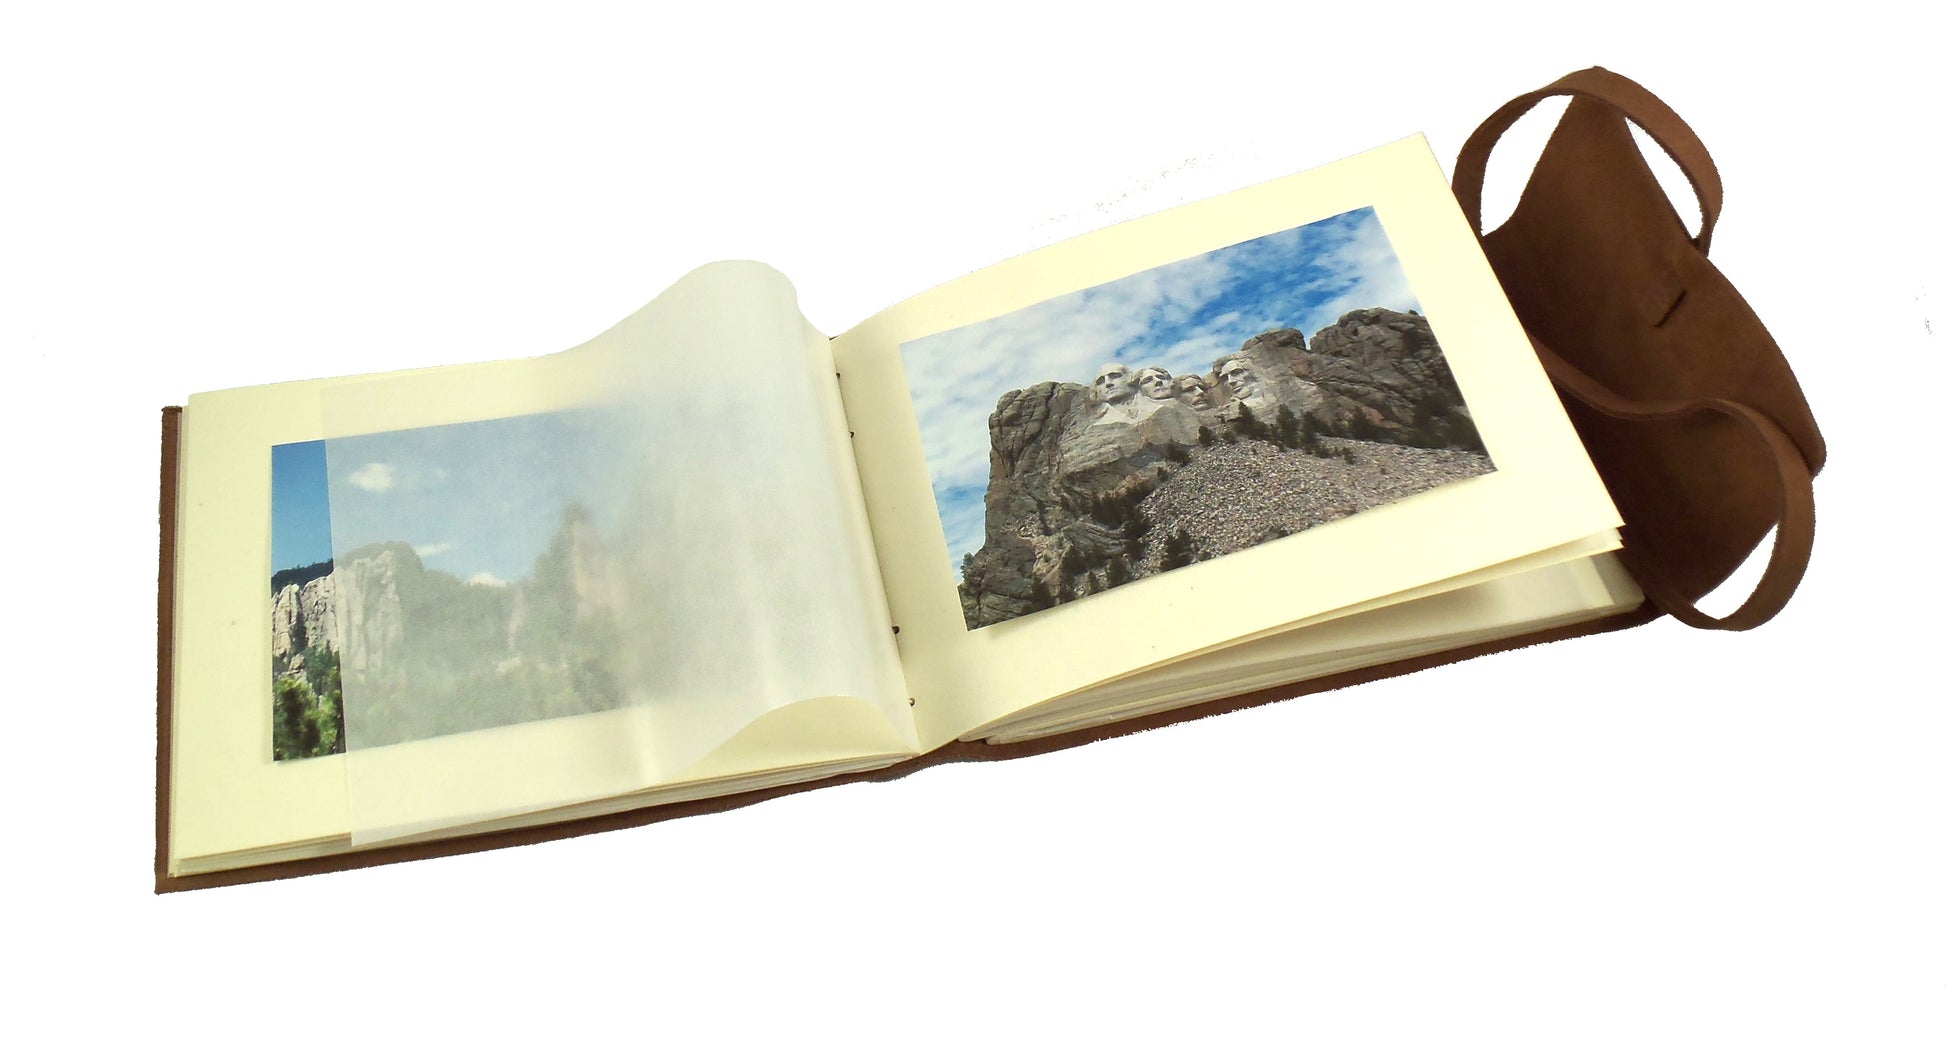 Leather Travel Photo Album with Window by Gallery Leather - Freeport Slate